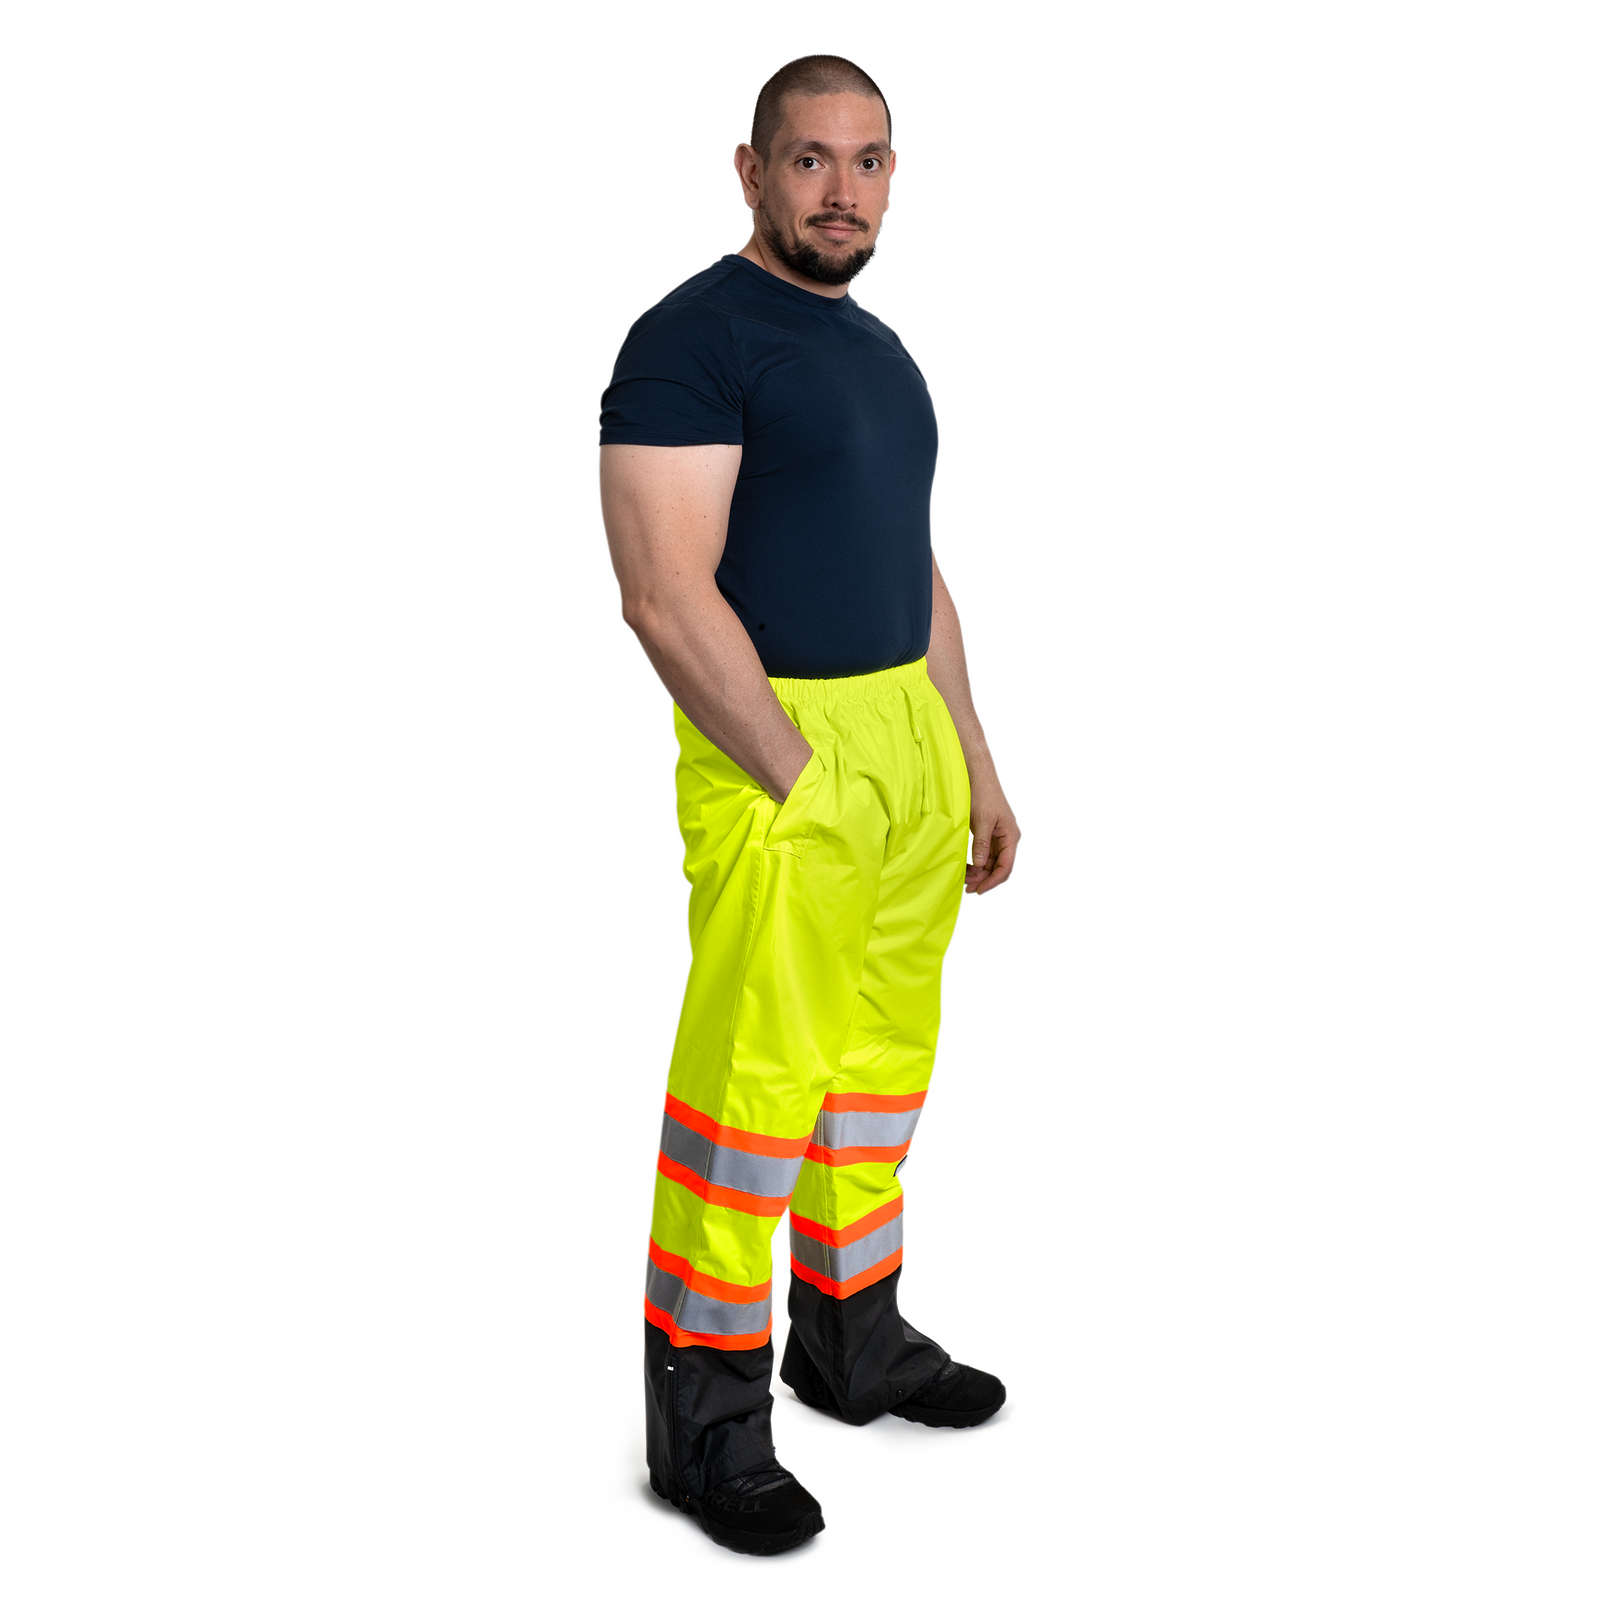 Man wearing the hi vis two tone safety rain pants with reflective and contracting stripes for road protection